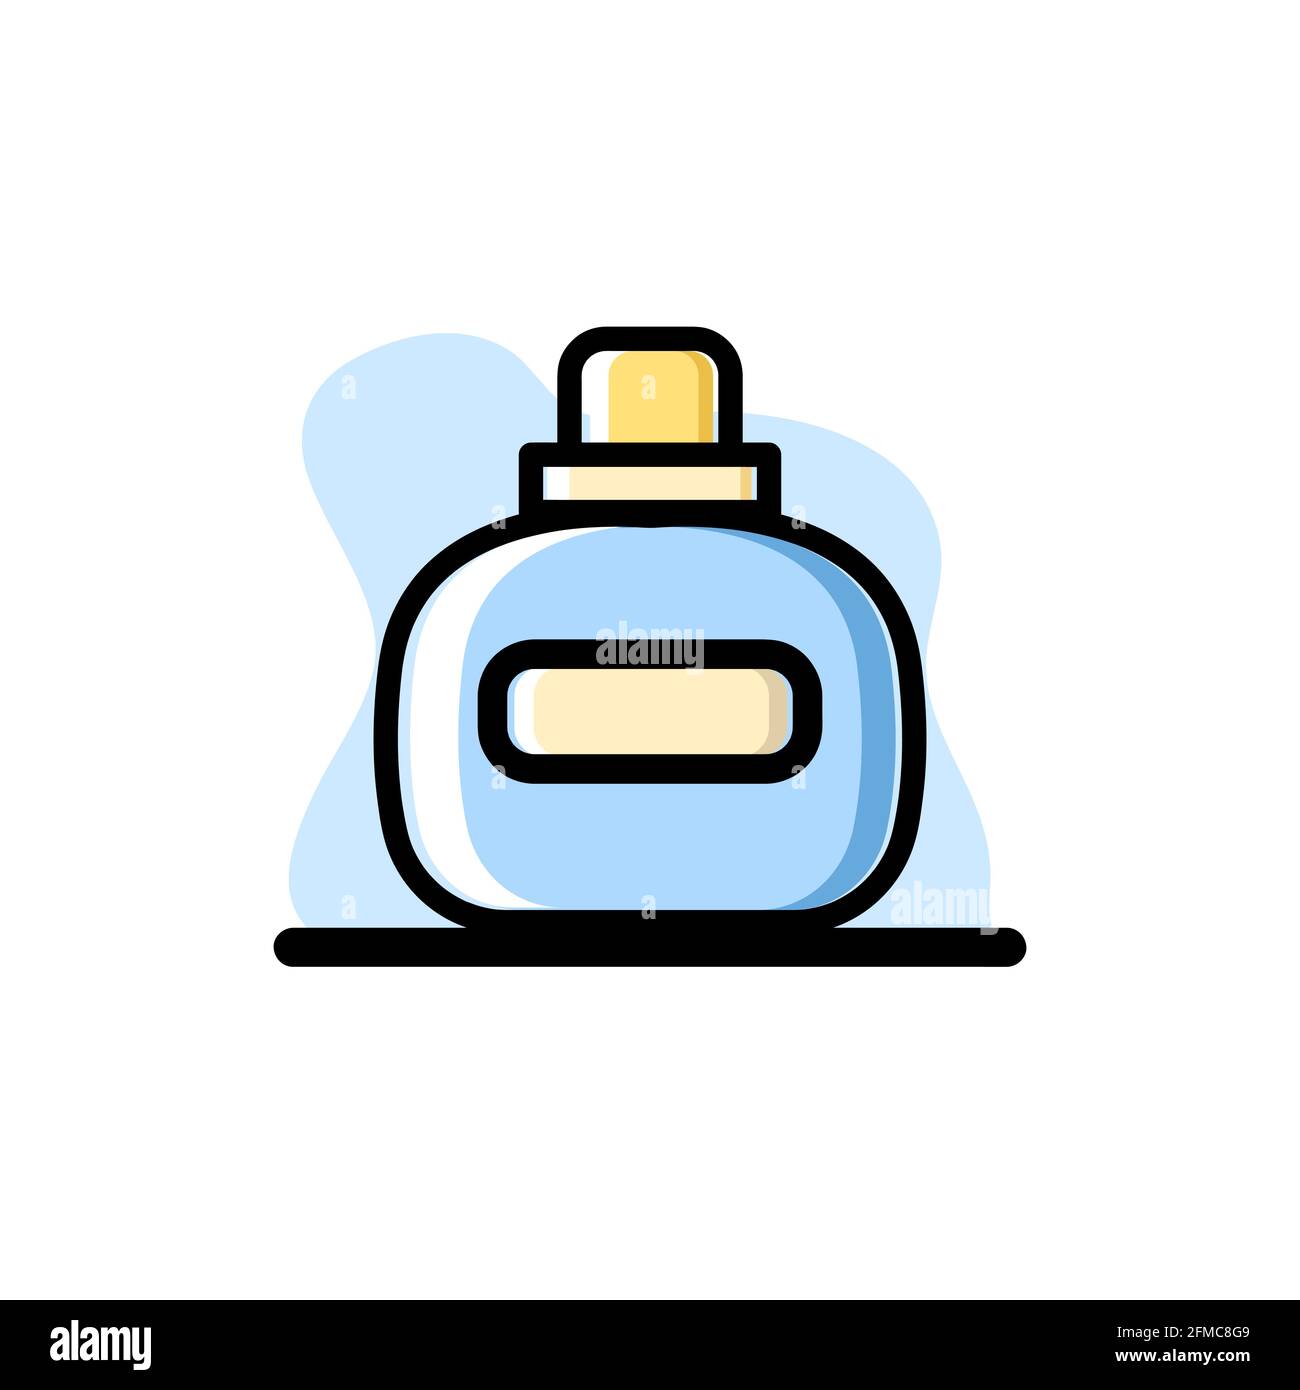 Glue Bottle Conceptual Icon Vector Illustration Design eps10 great for any purposes Stock Vector